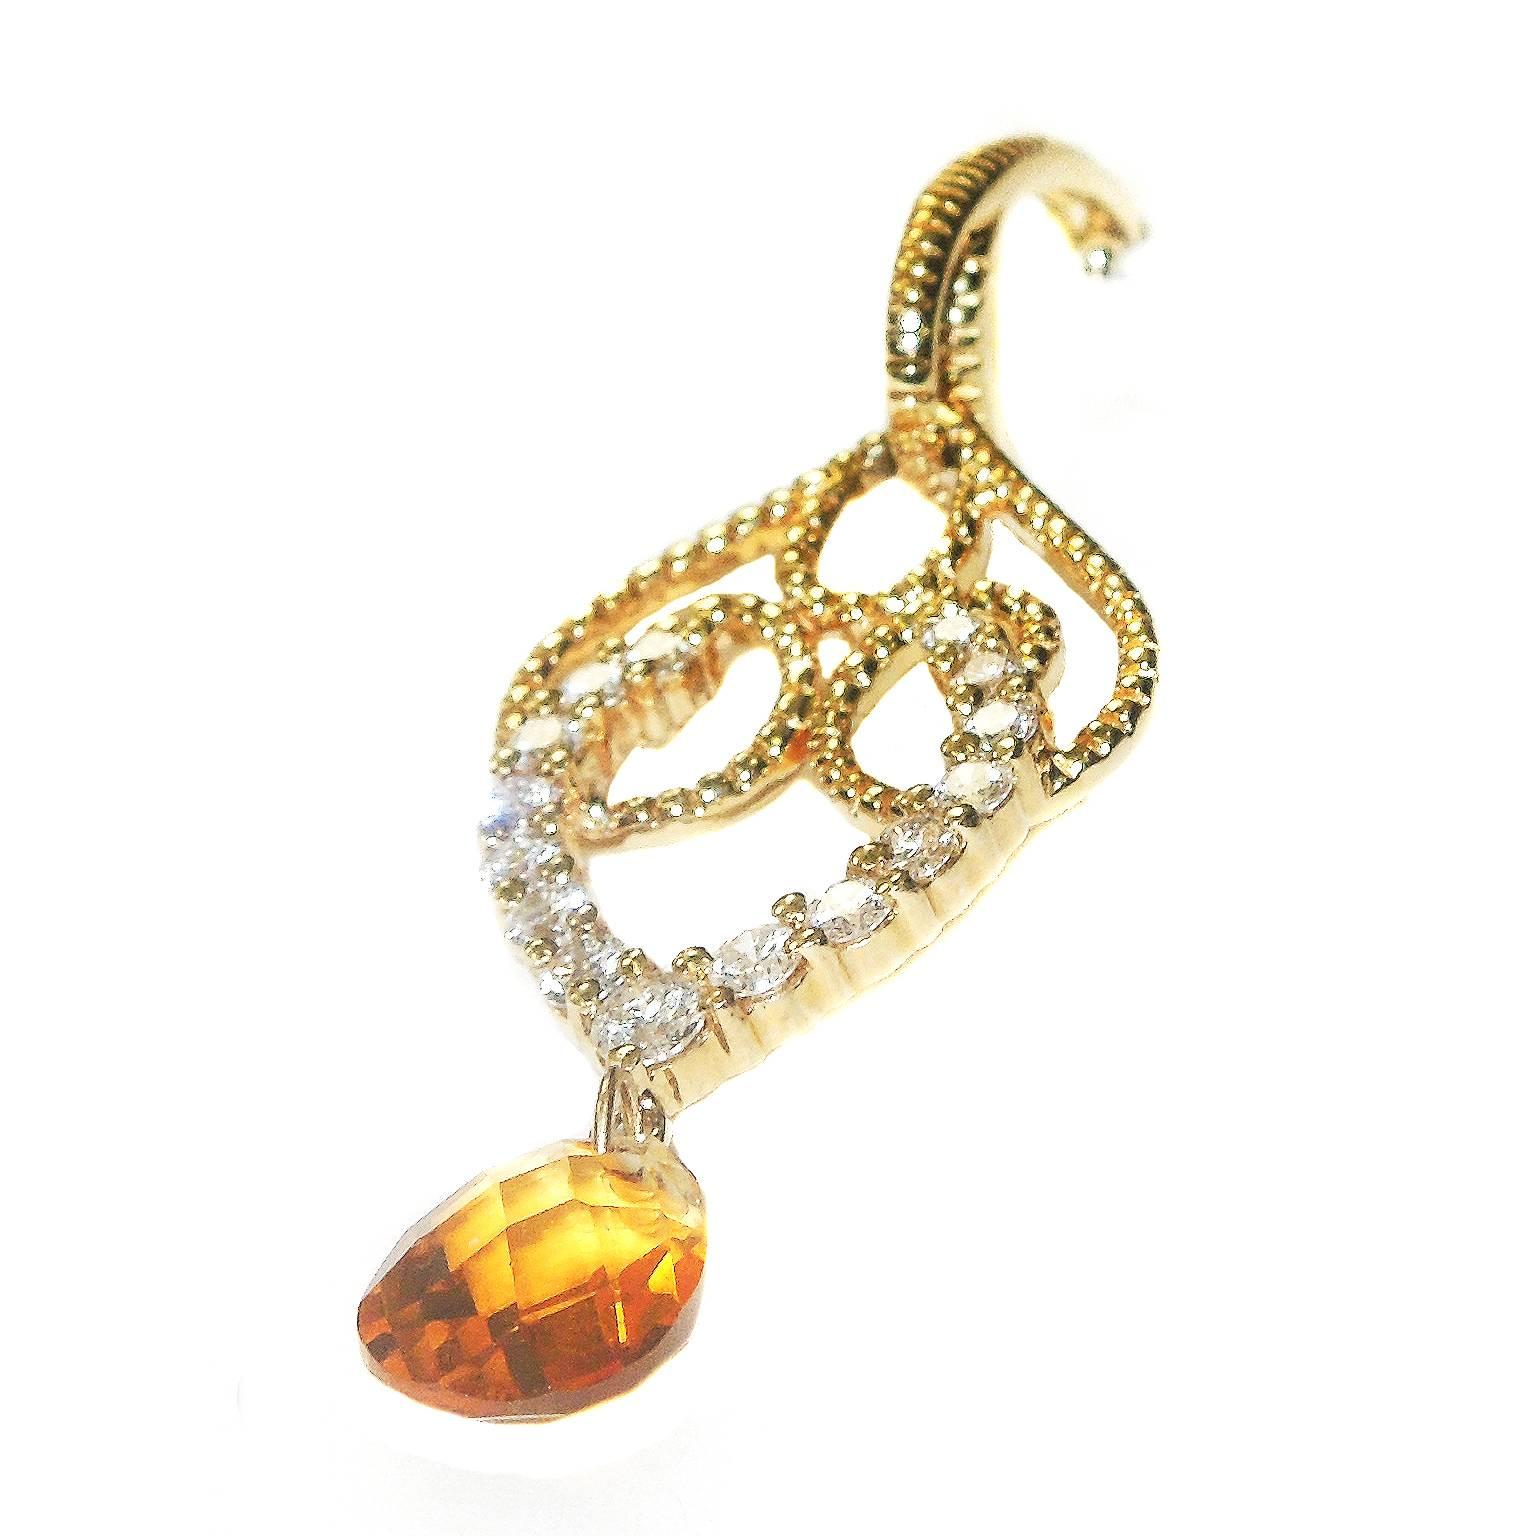 14K Gold Earrings with Diamonds and Citrine Drops

0.75 ct. diamonds 

Unknown citrine weight

3.4 grams 14k gold

2 inches length

Estate